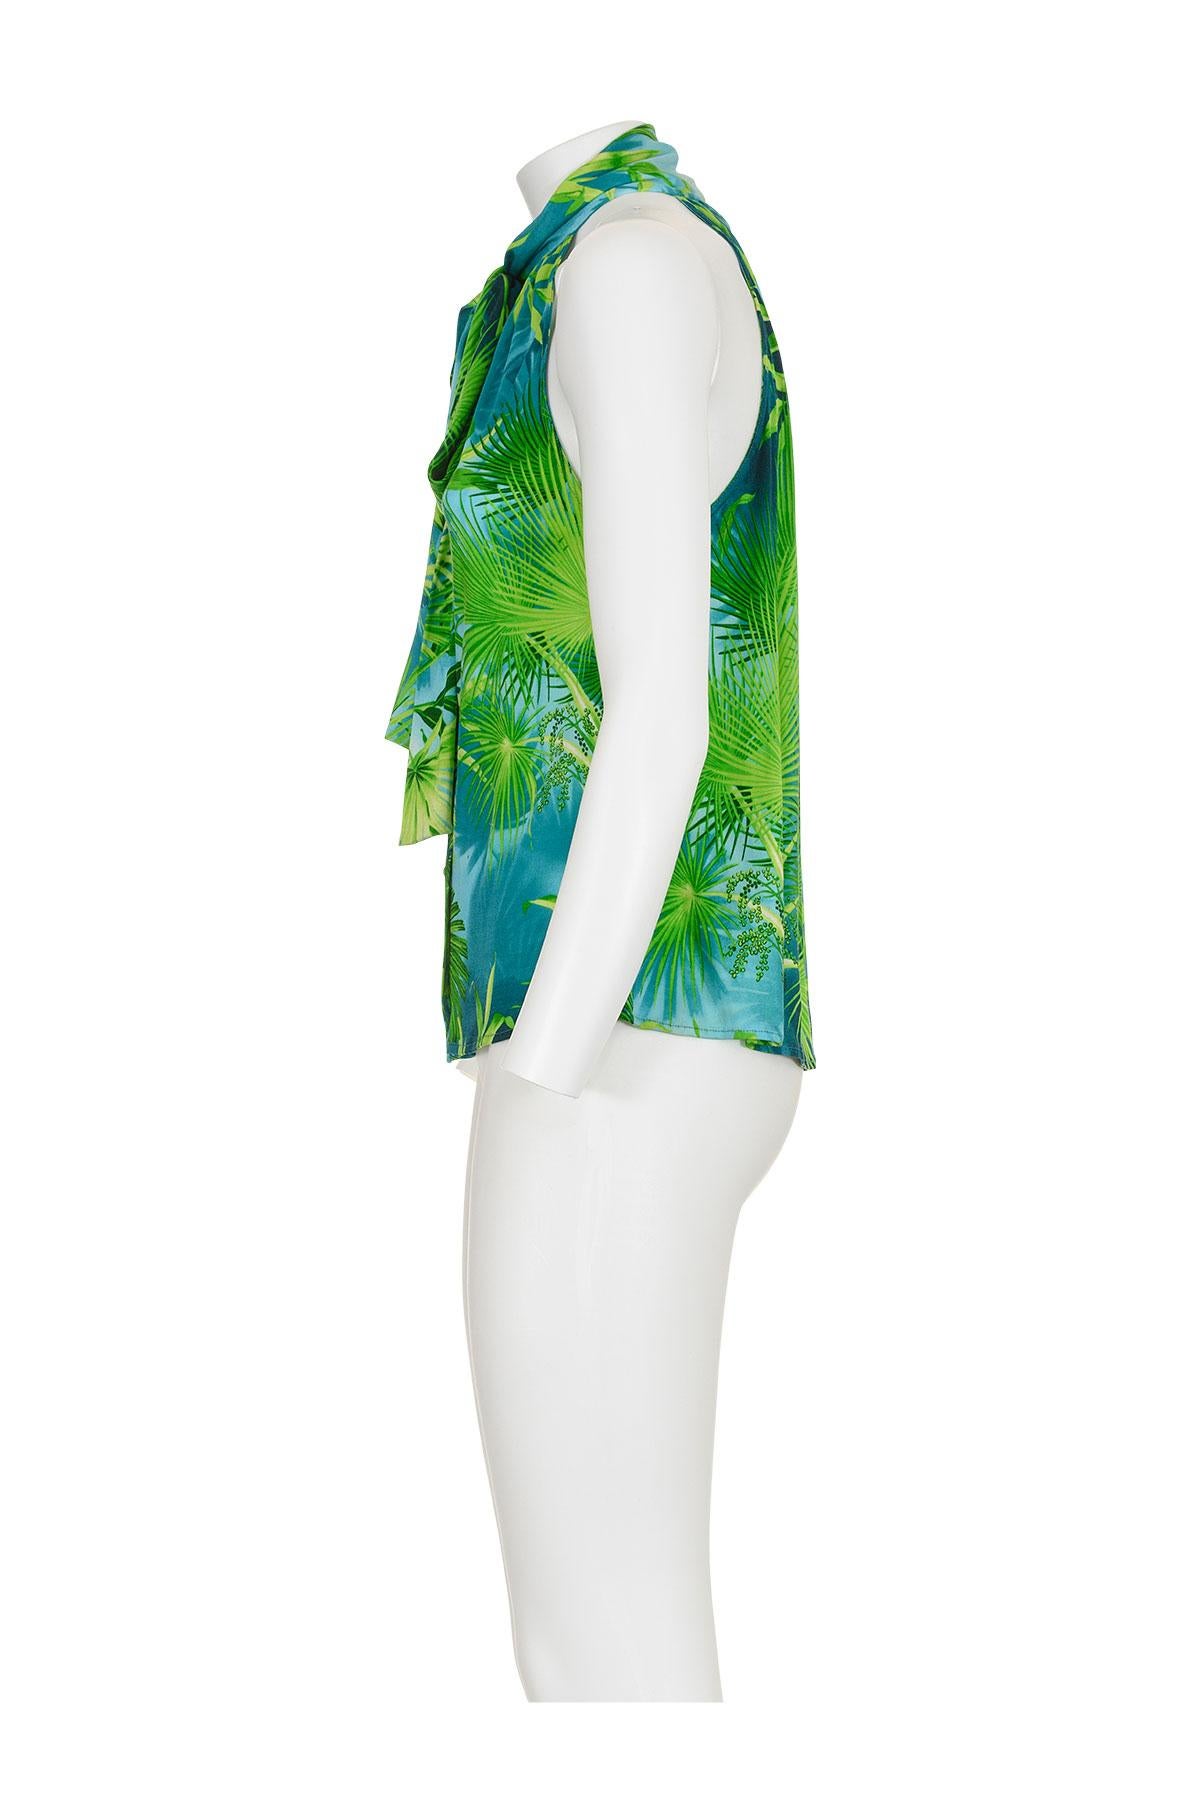 Spring Summer 2000 iconic jungle halter neck top by Gianni Versace.
Tie at neck.
Swarovski buttons.
The composition tag is missing, seems to be made of silk and jersey.